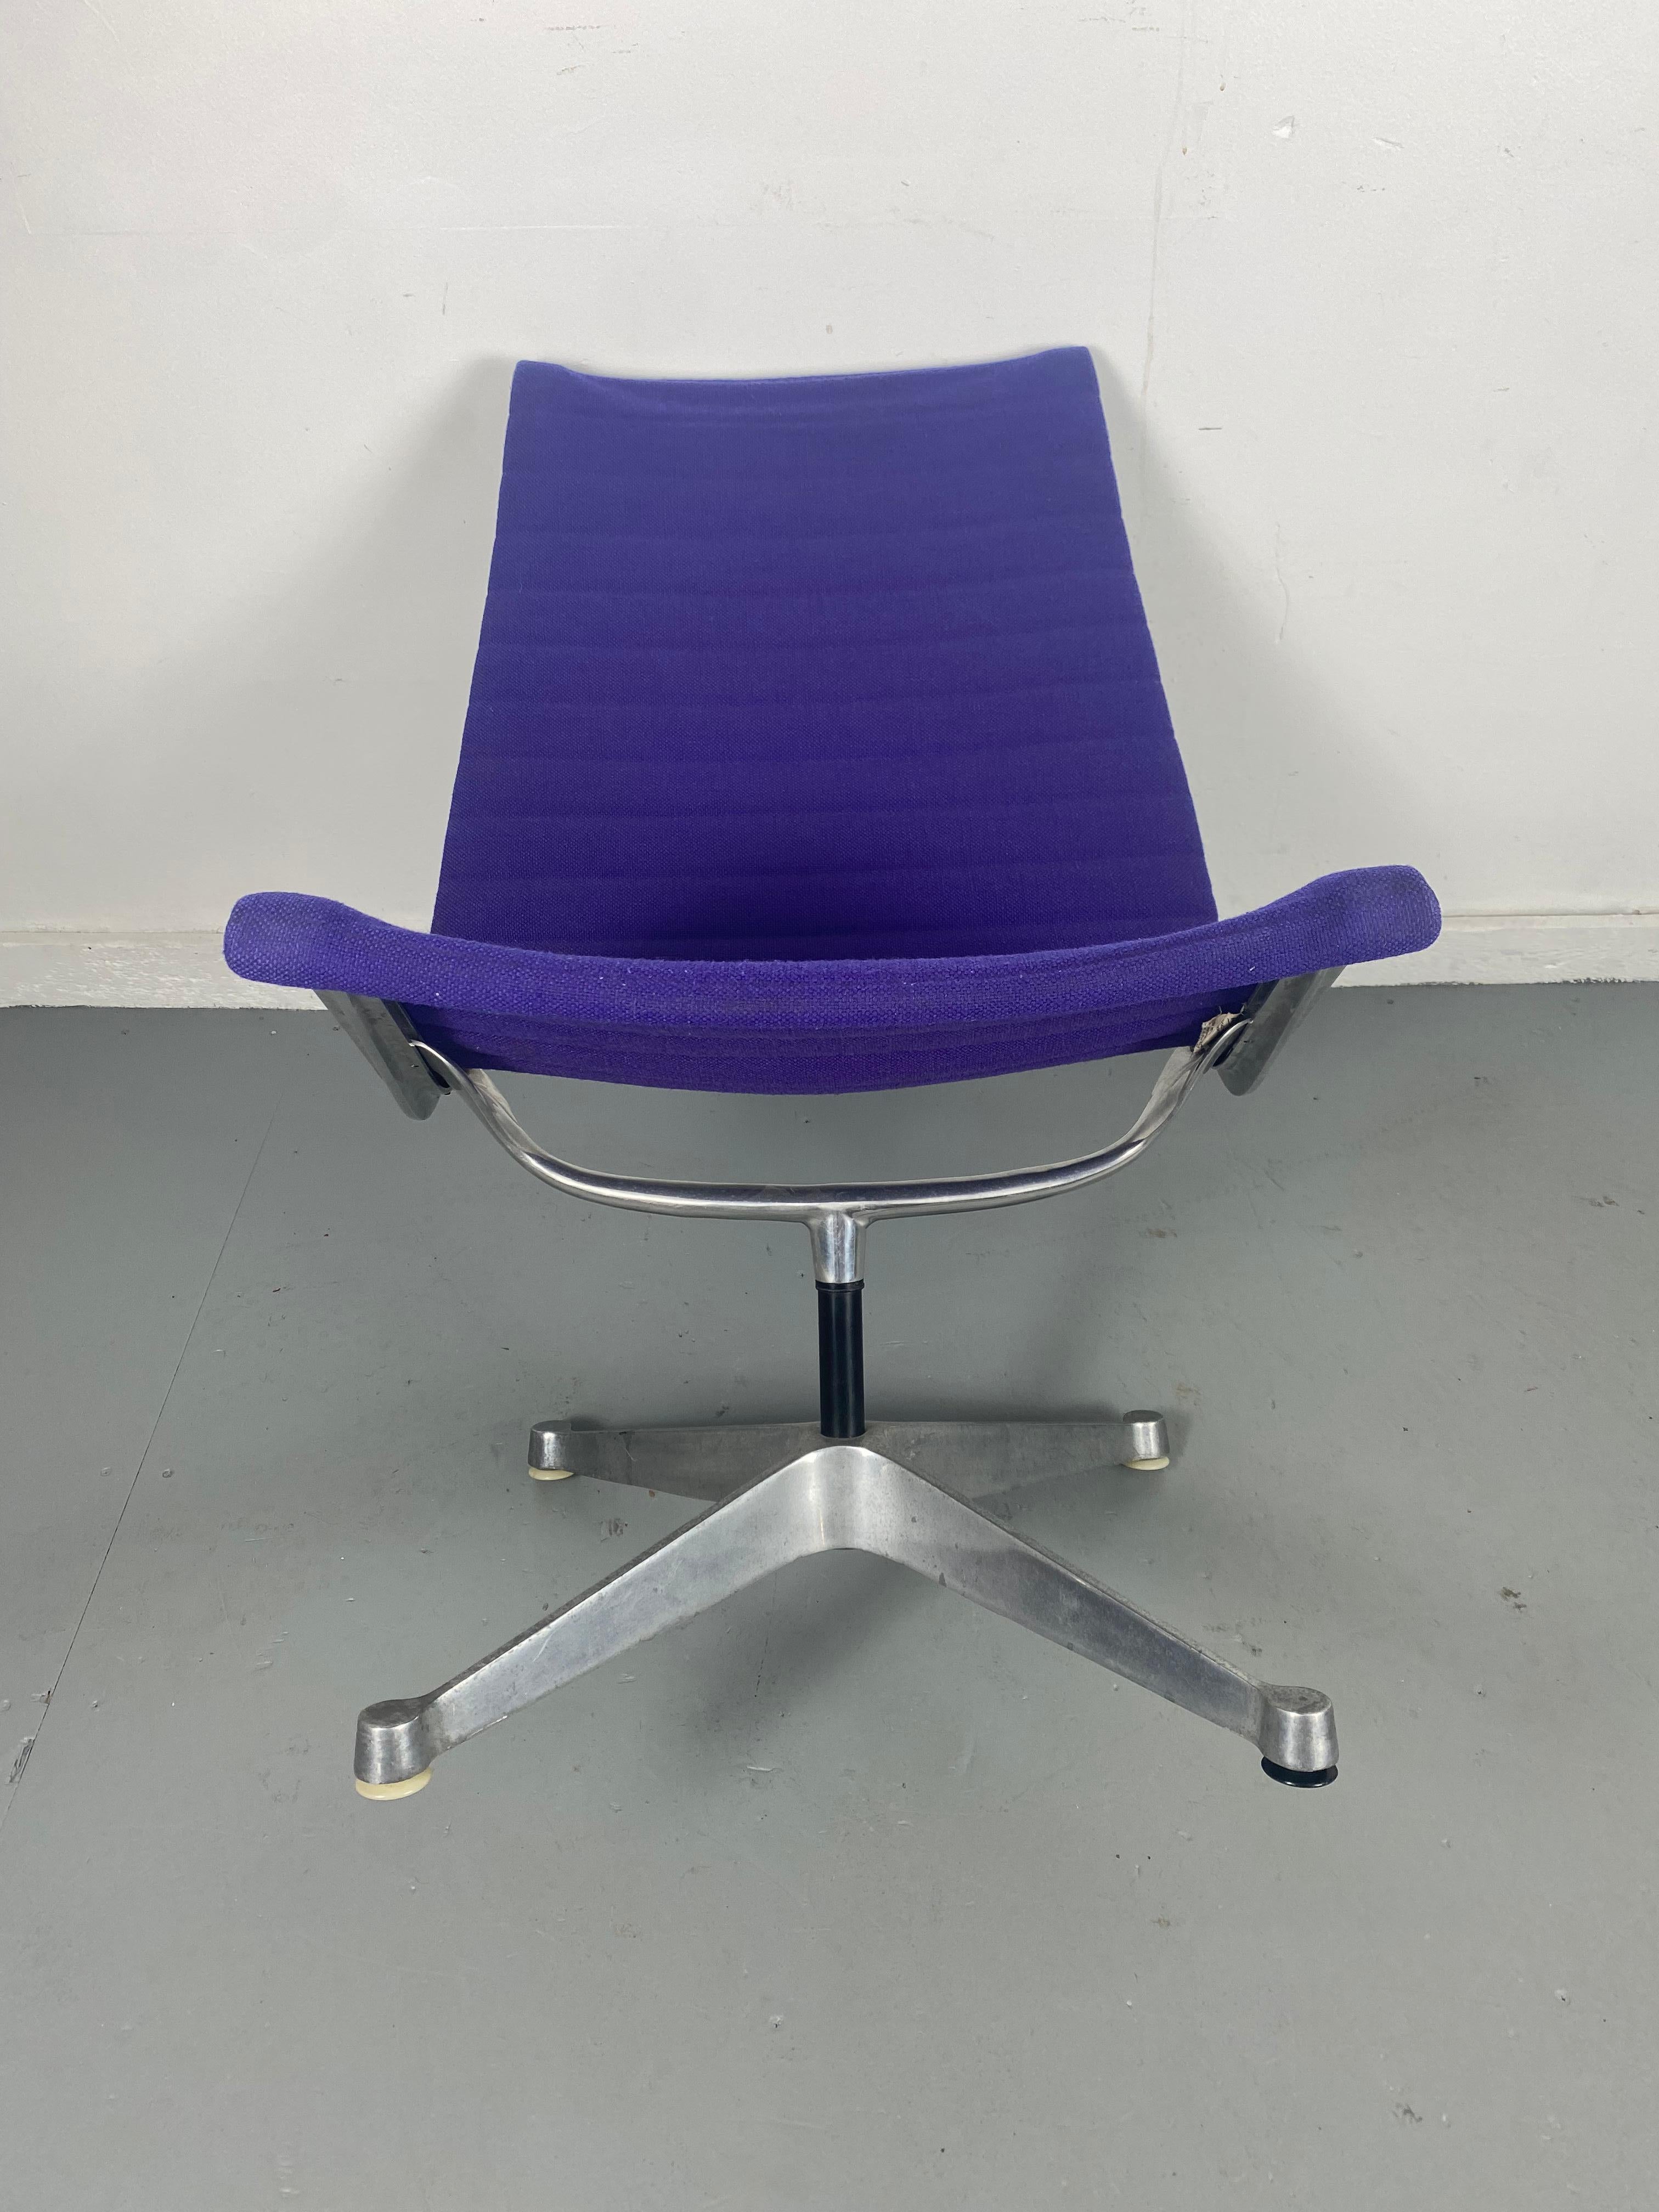 Mid-20th Century Early Eames Aluminum Group Swivel Lounge Chair / Herman Miller, 4 star base